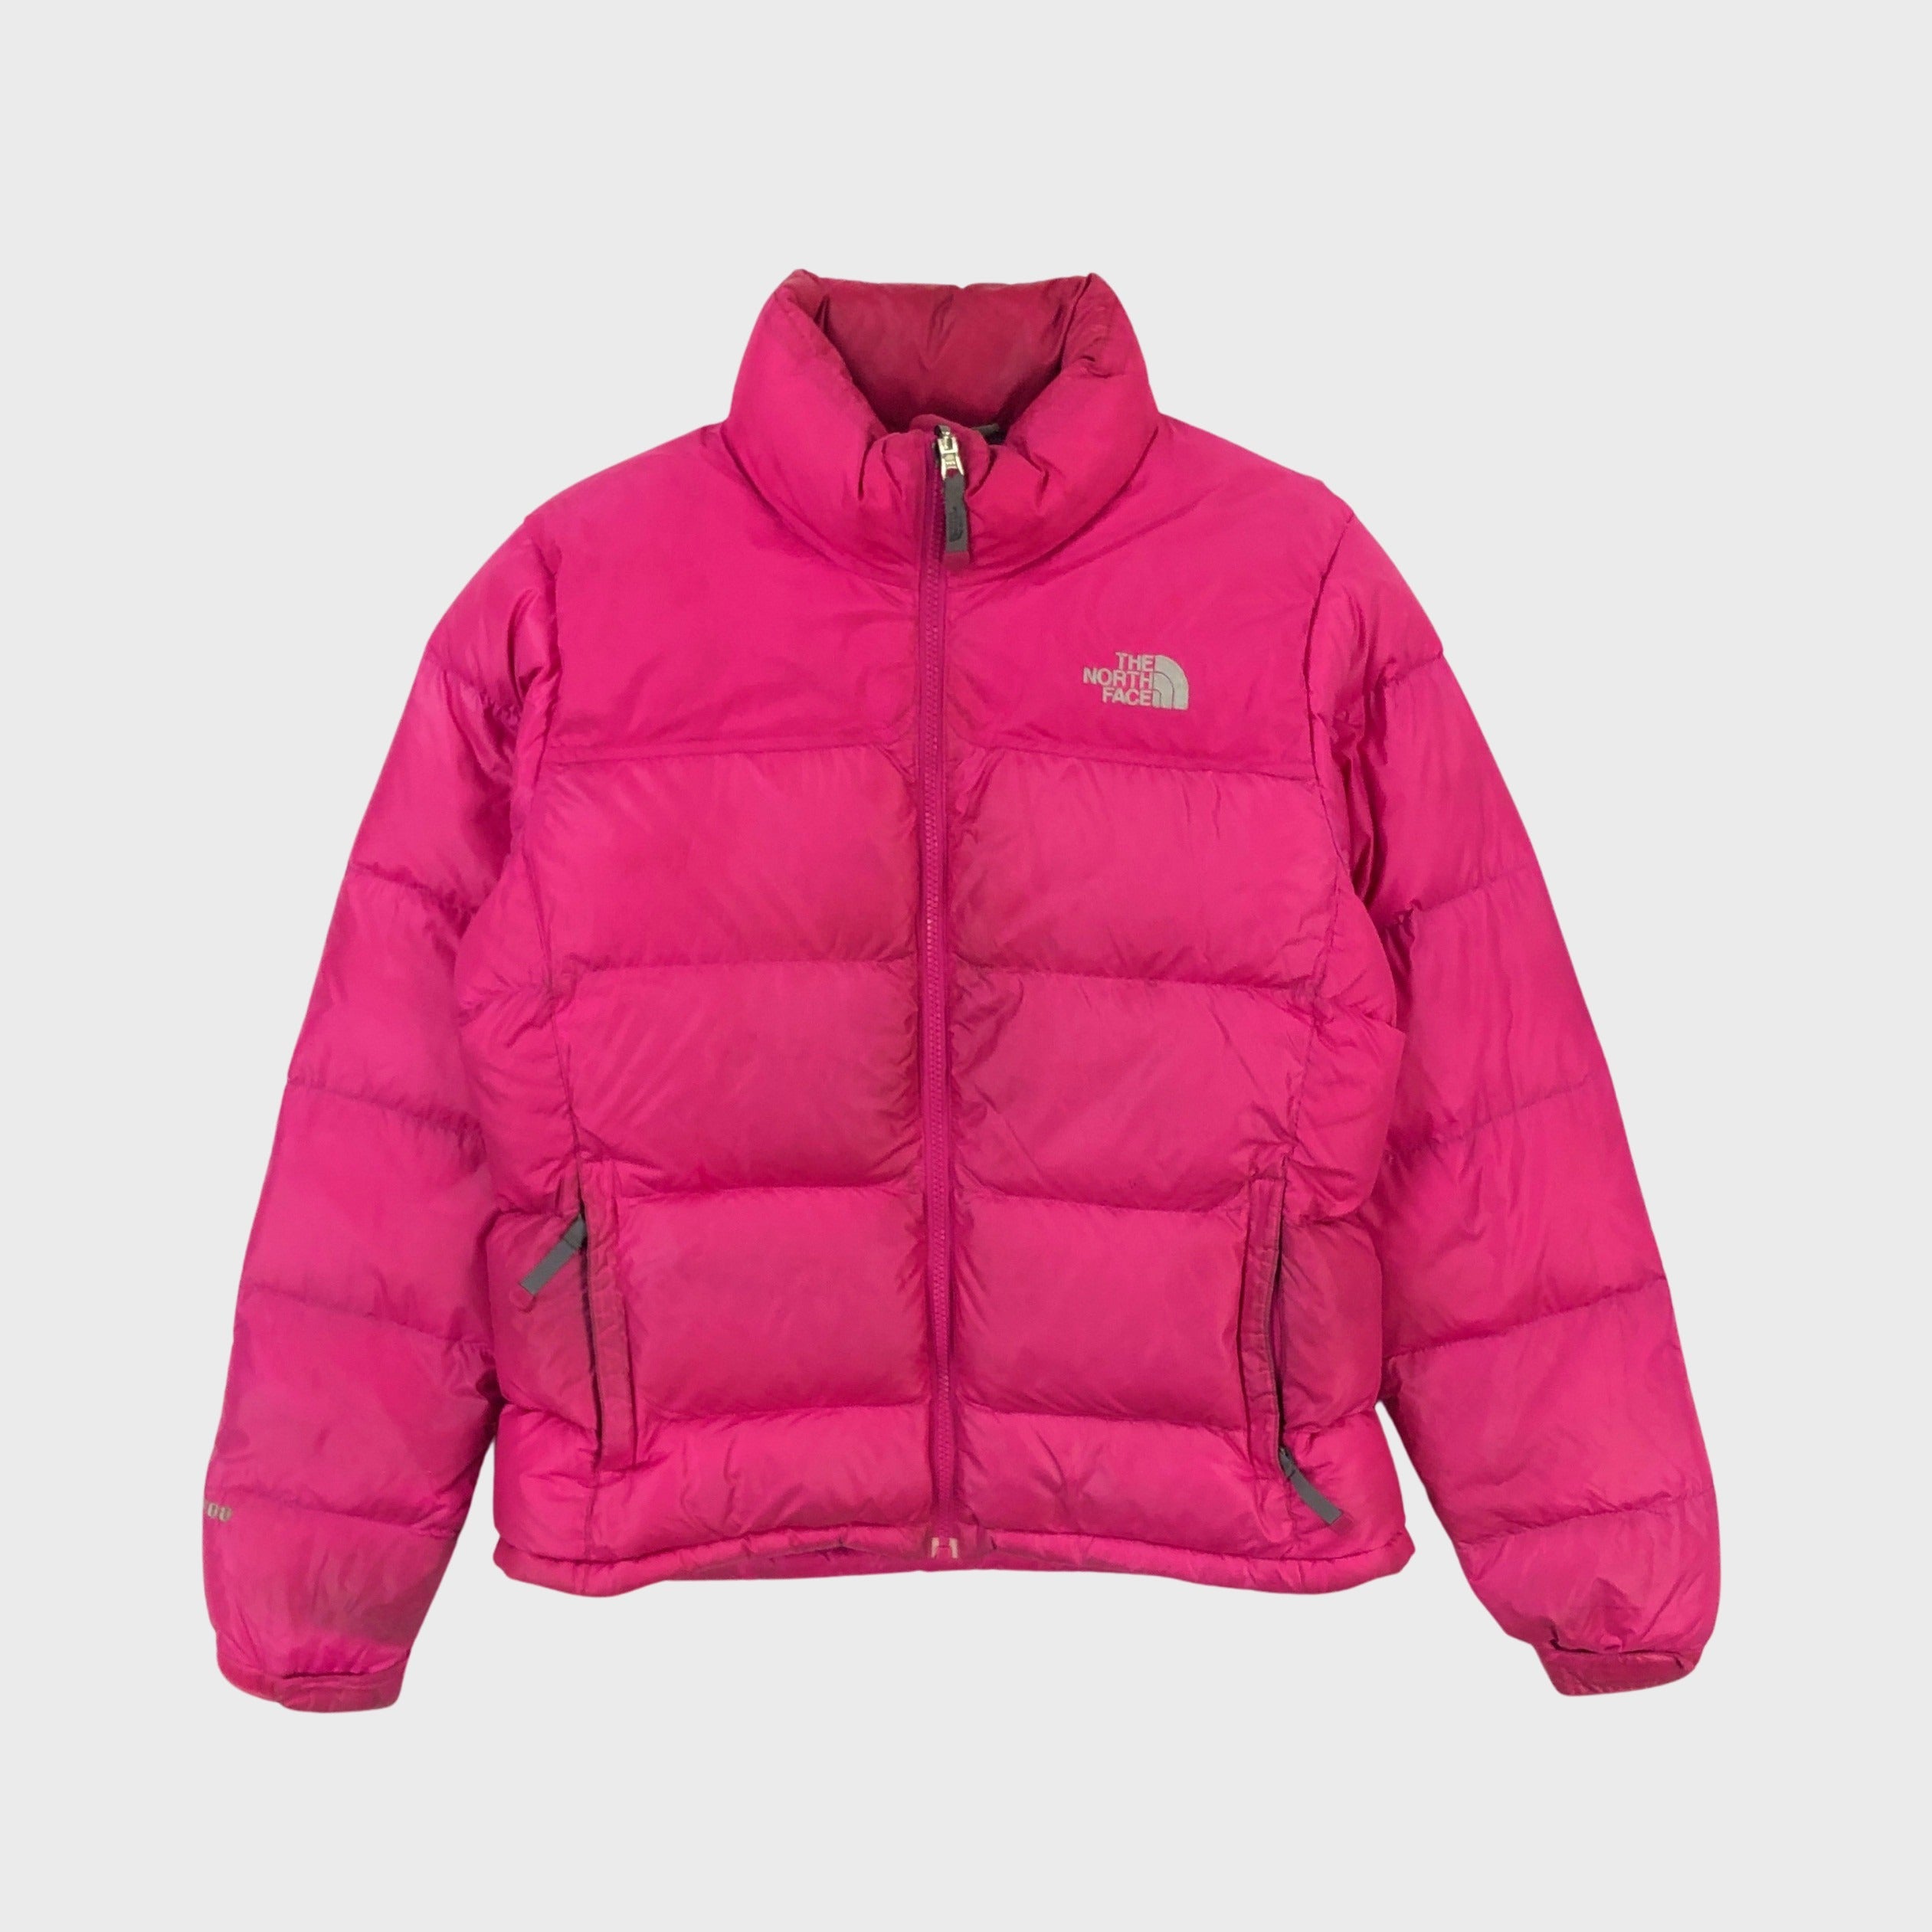 the north face puffer jacket 700